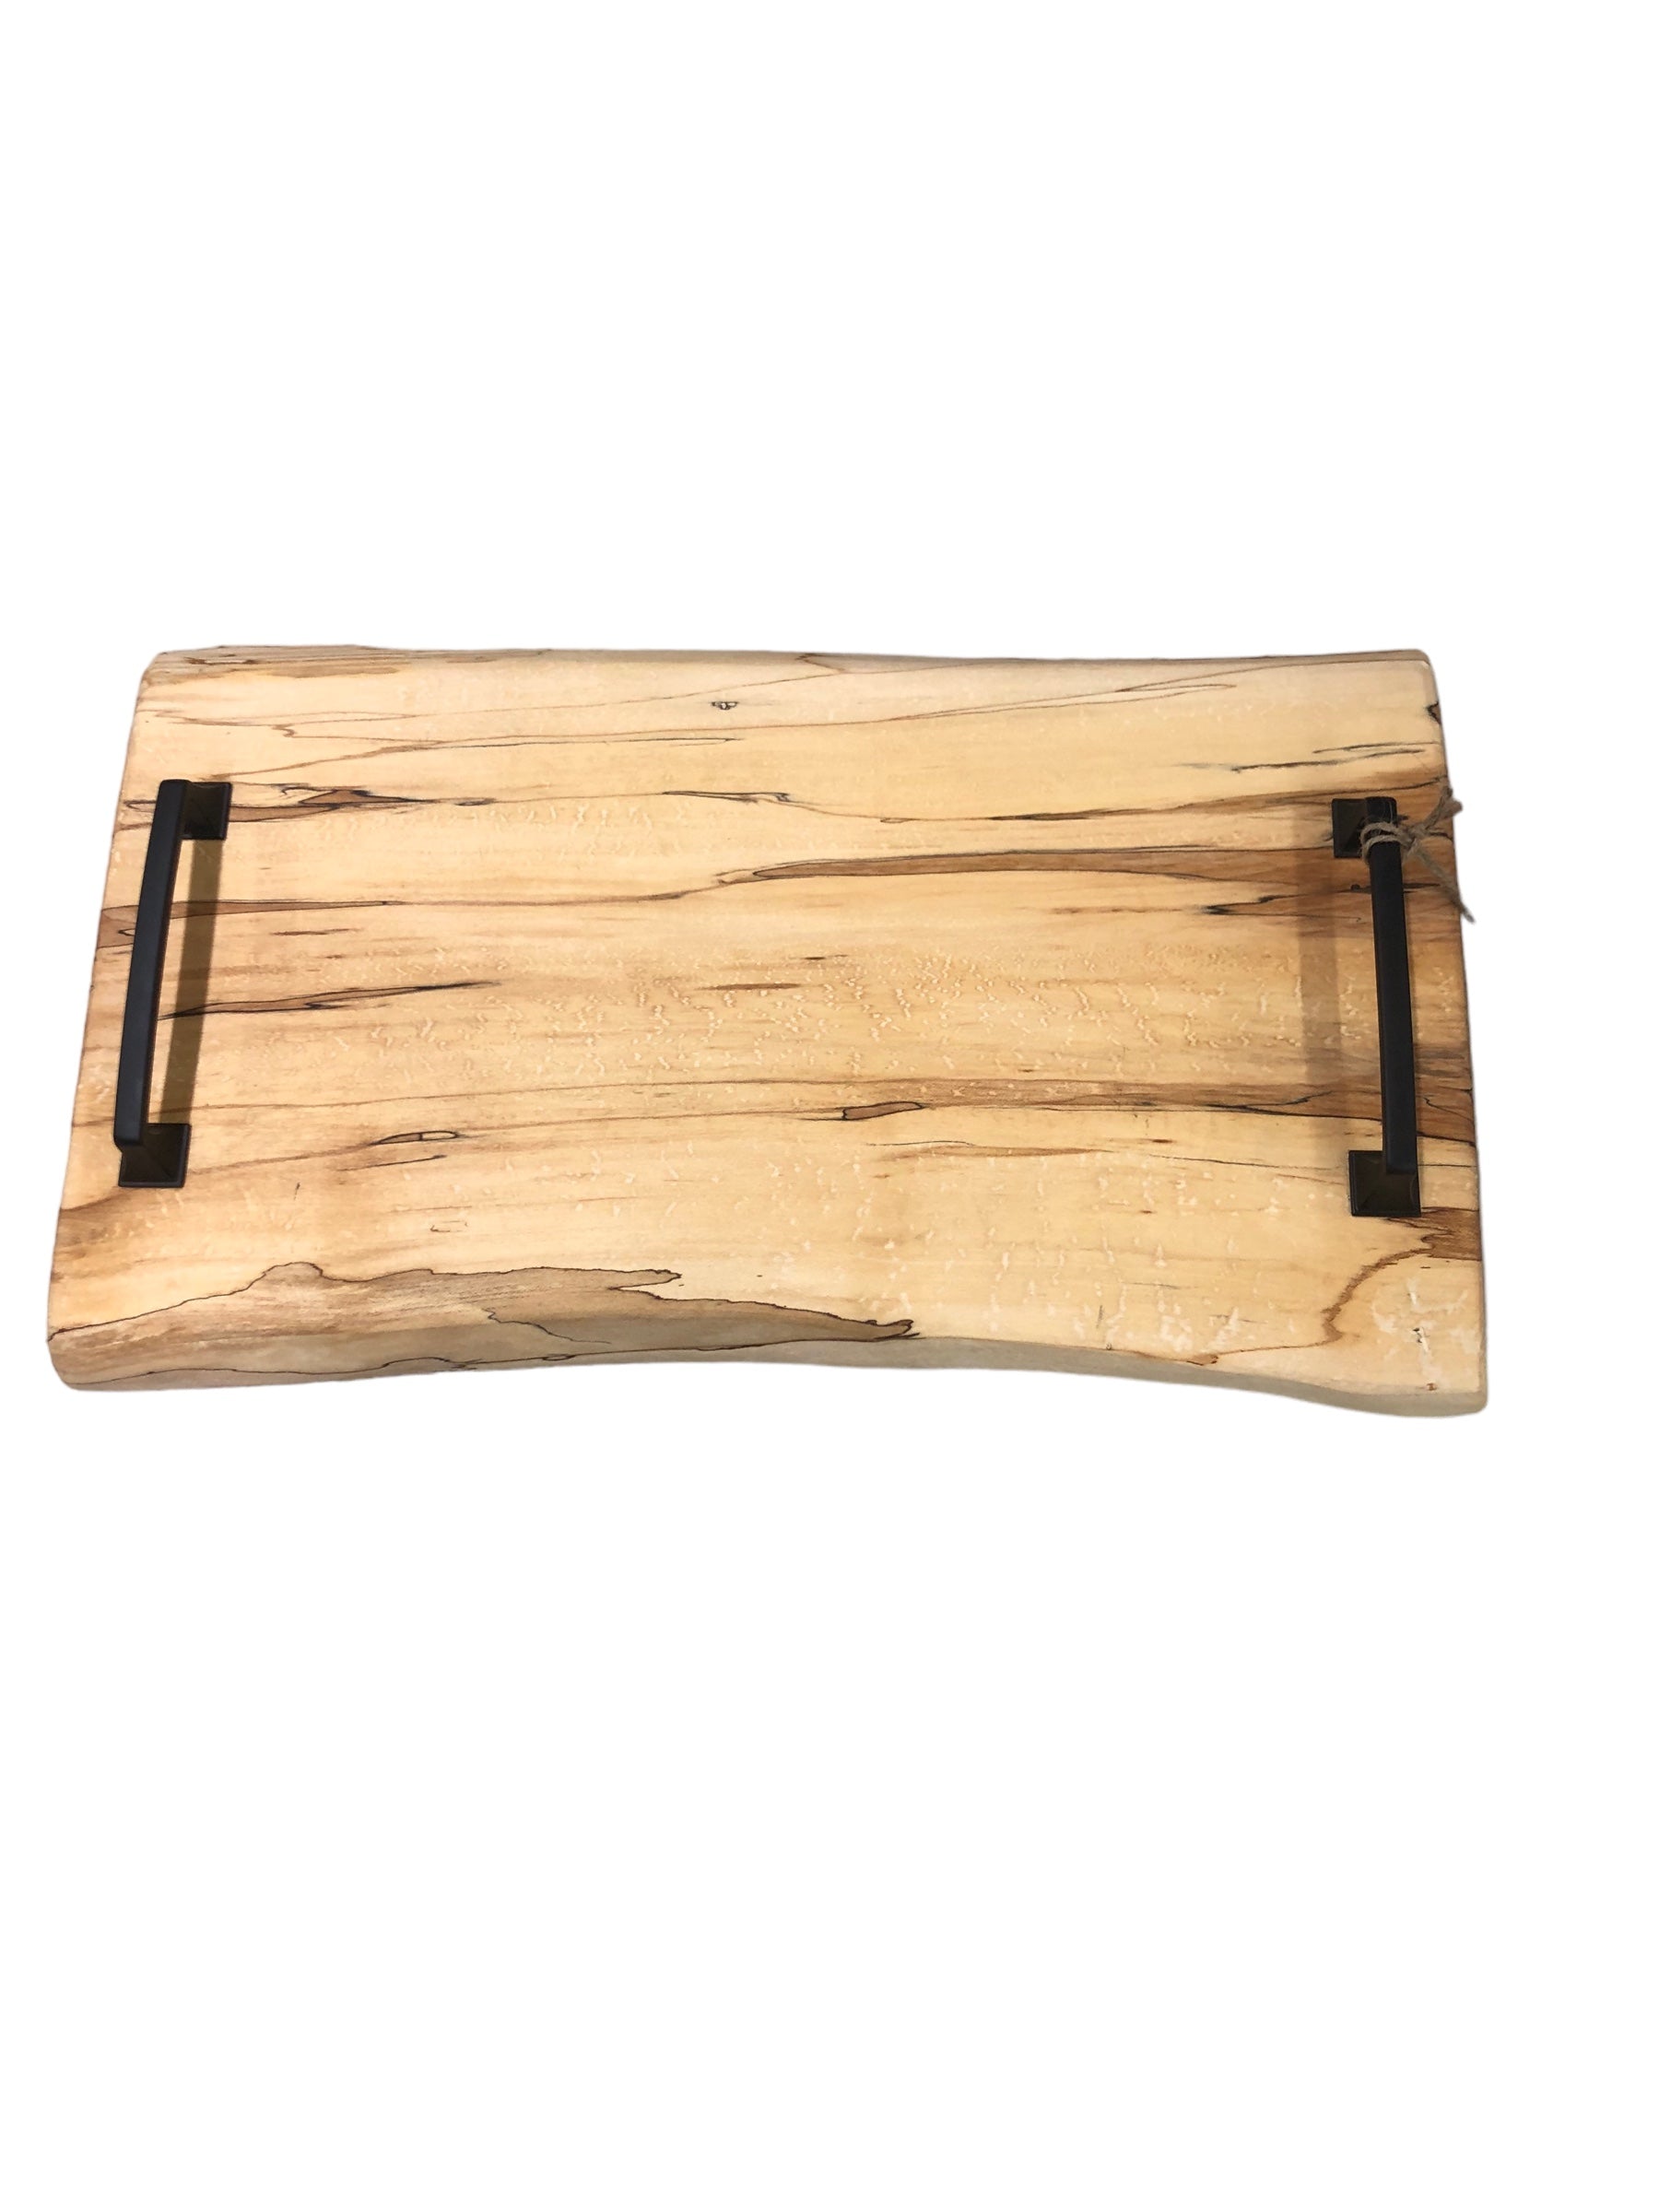 burled maple serving tray